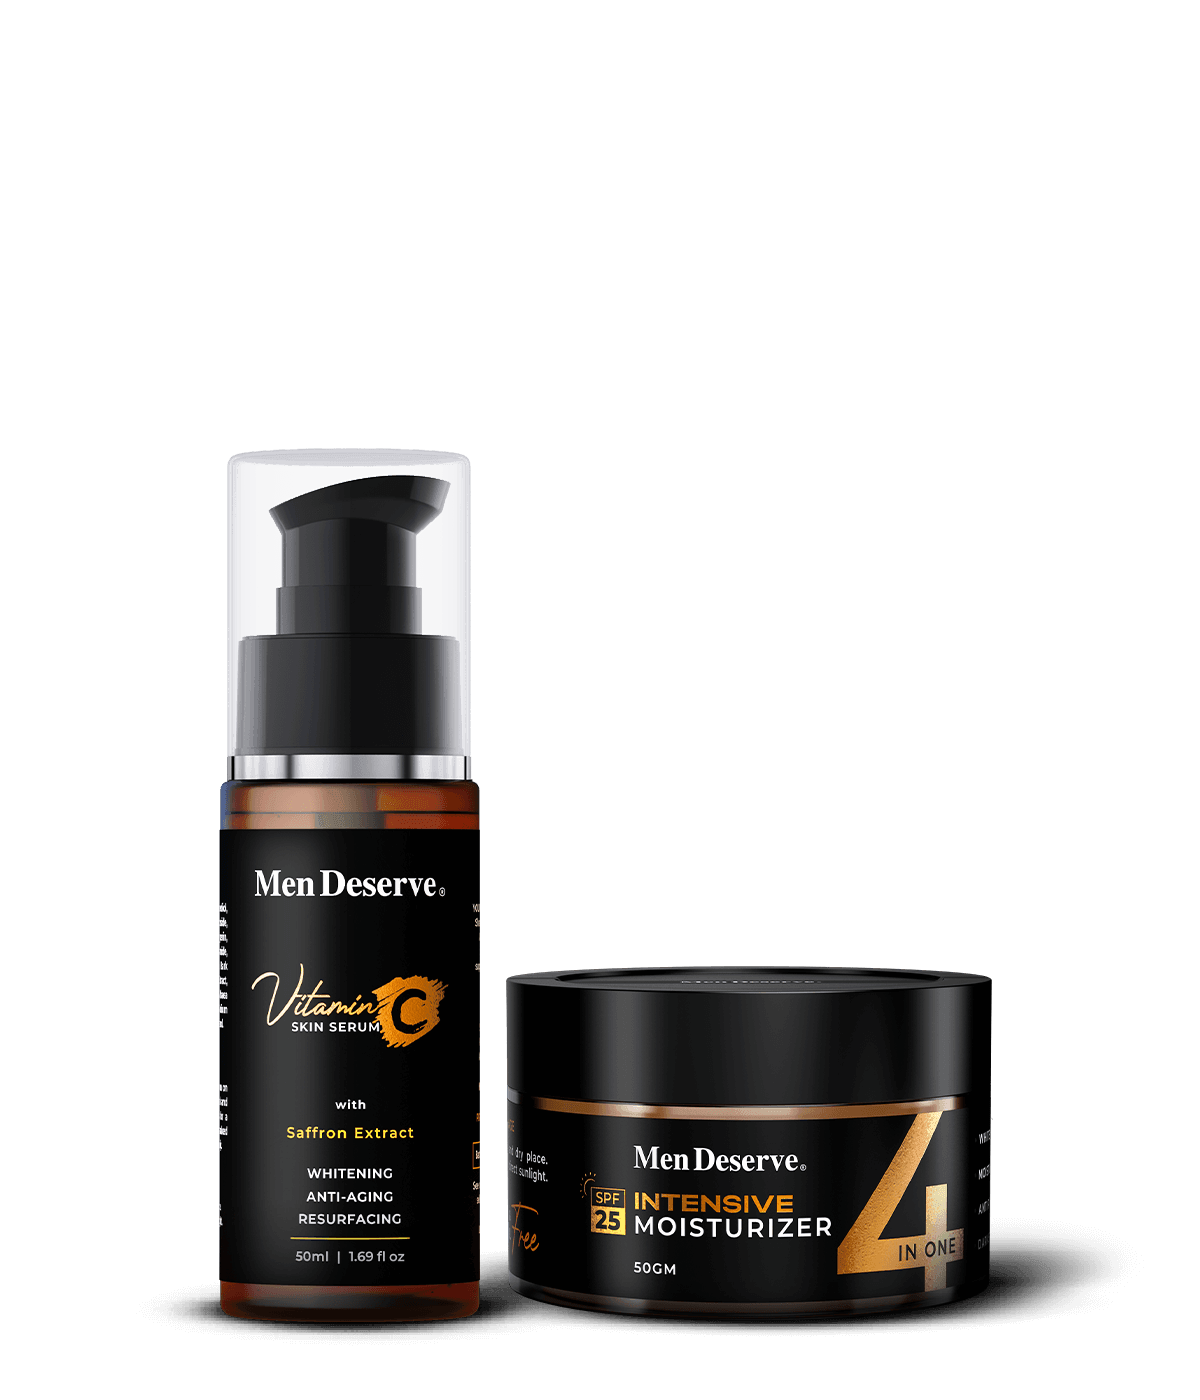 Skin Care Essentials for Youthful Glow and Sun Protection - Men Deserve